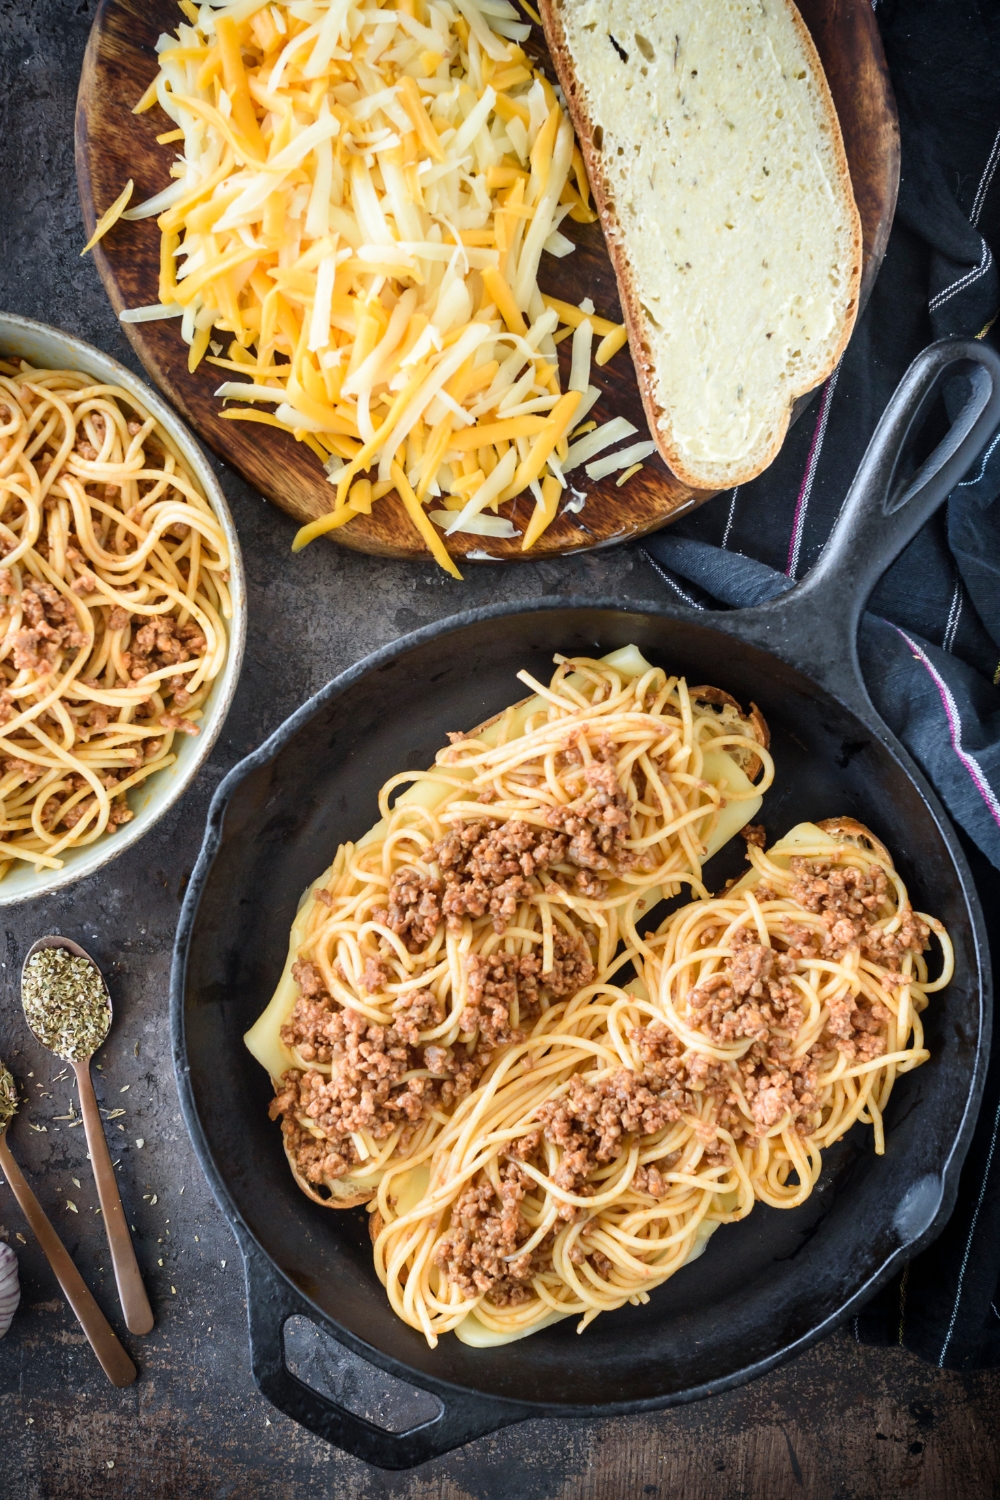 Two pieces of toast topped with cheese and spaghetti in meat sauce in a cast iron skillet.